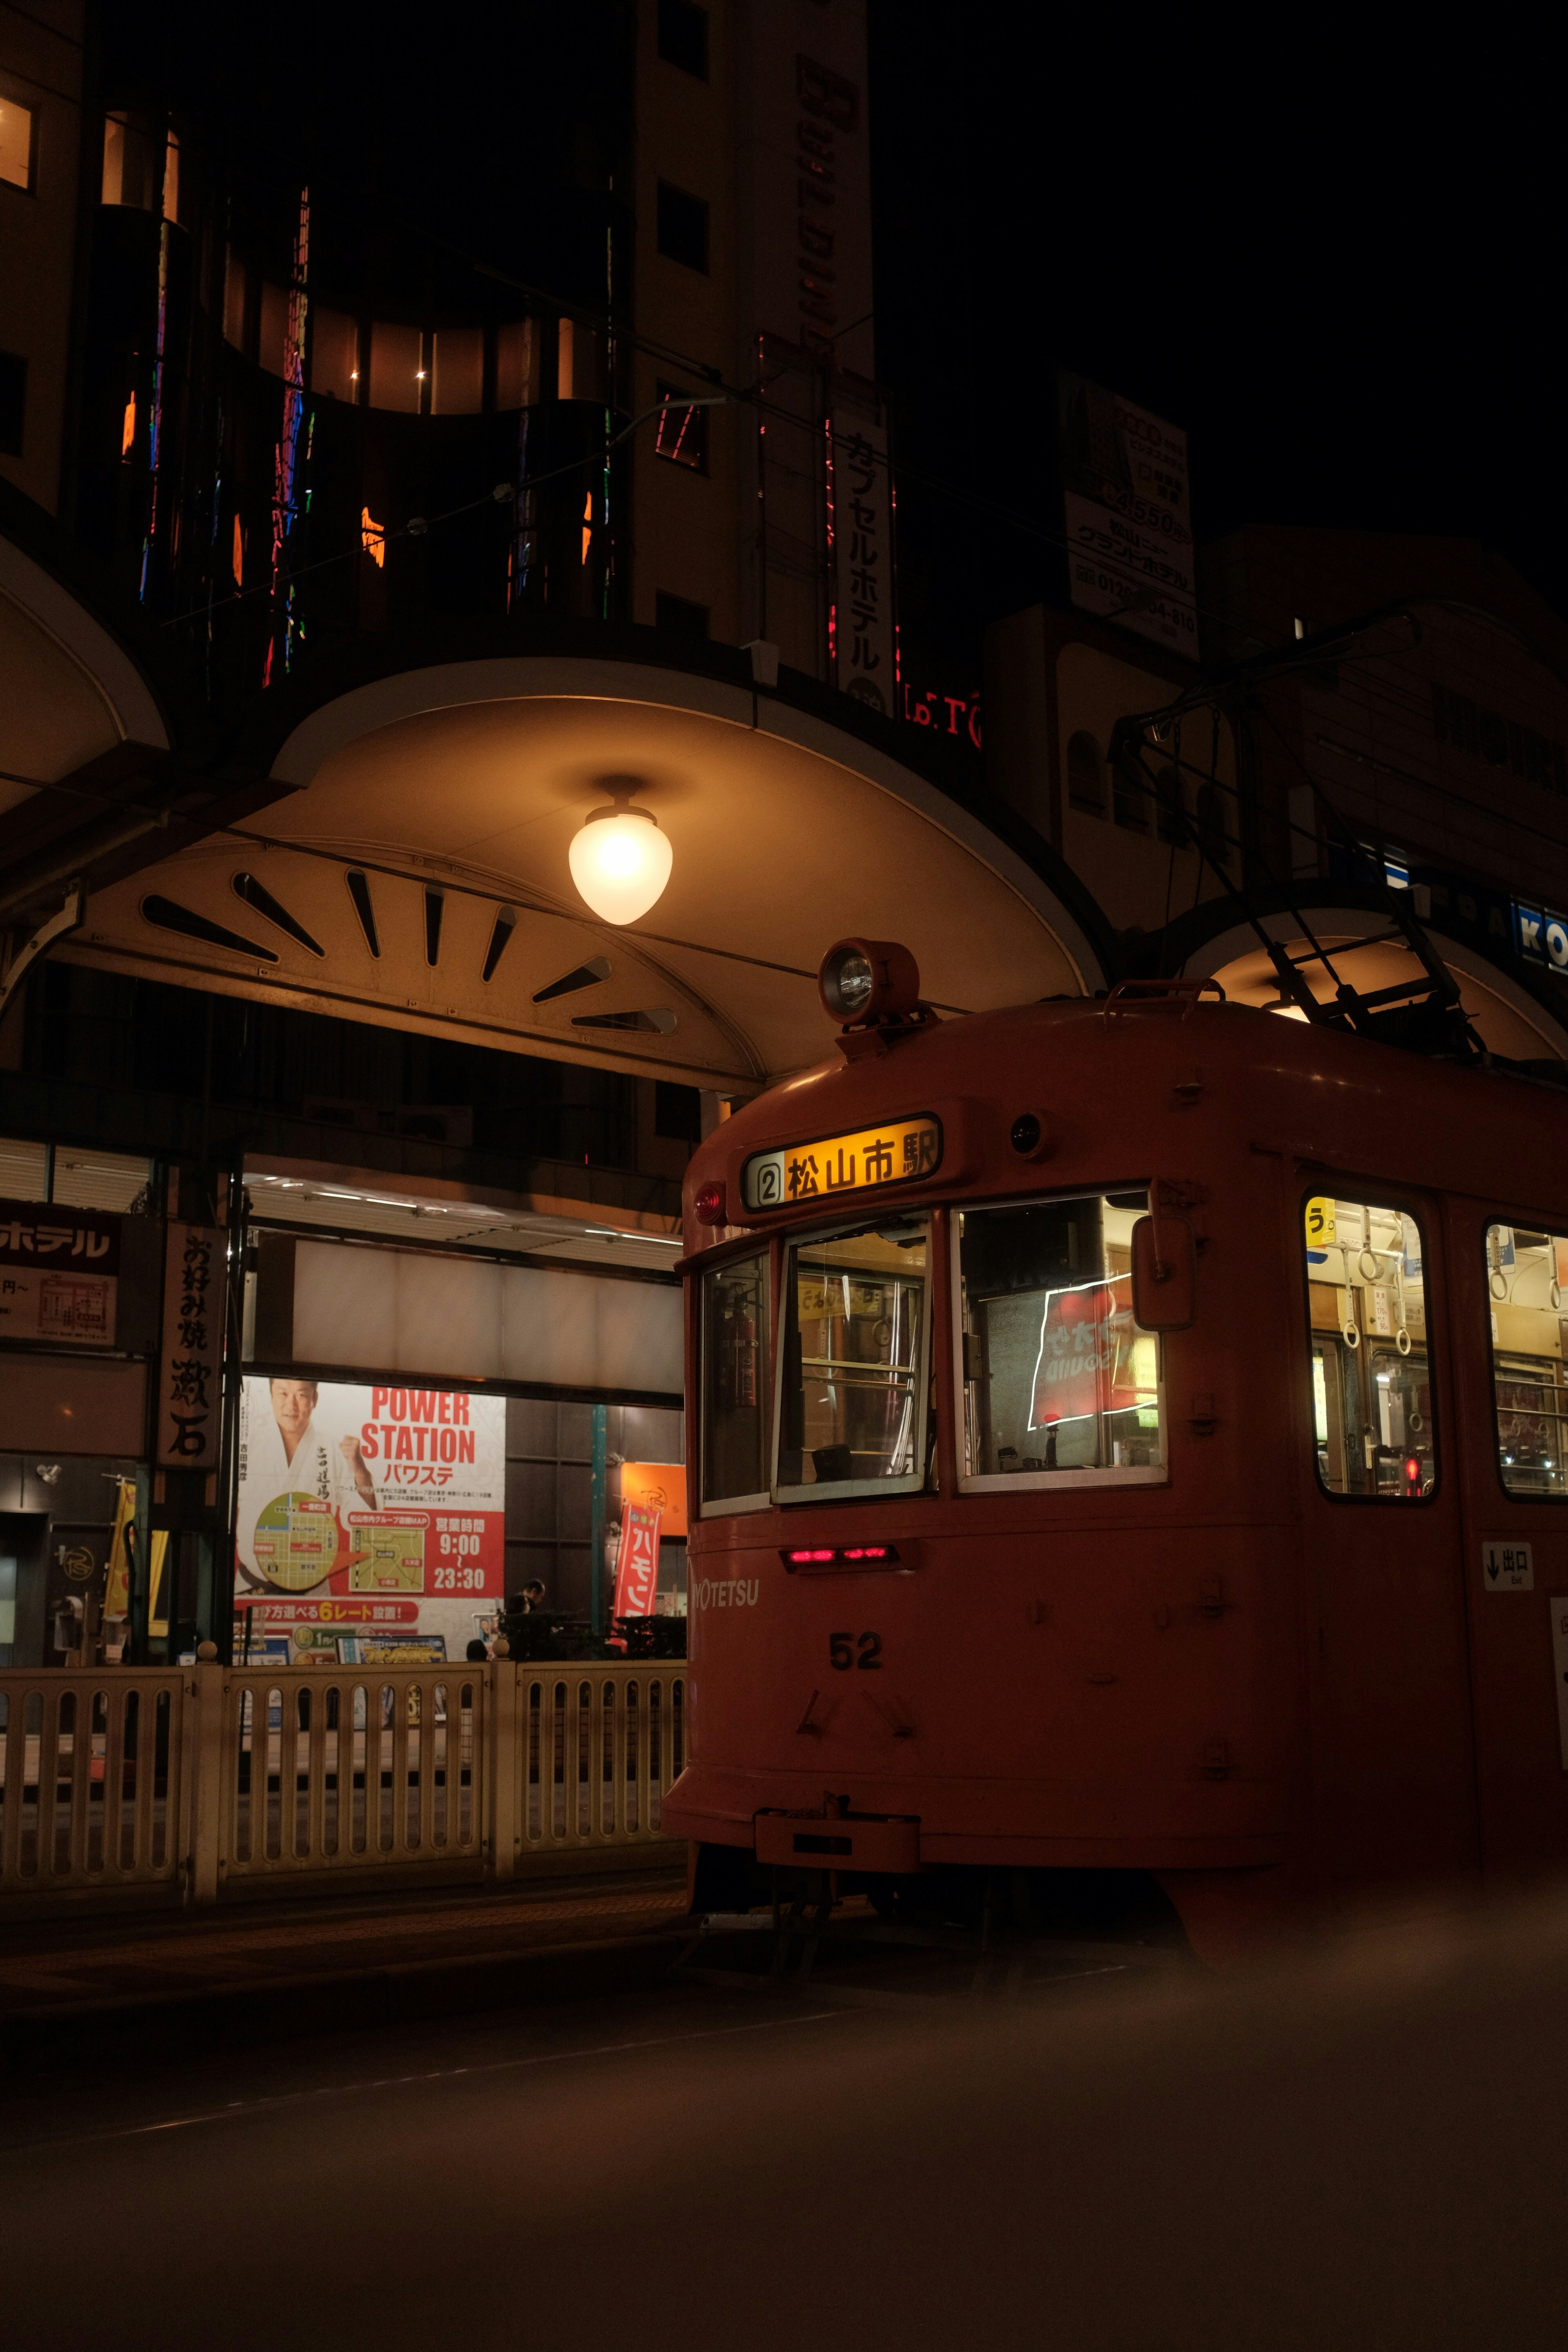 red tram in the city during night time